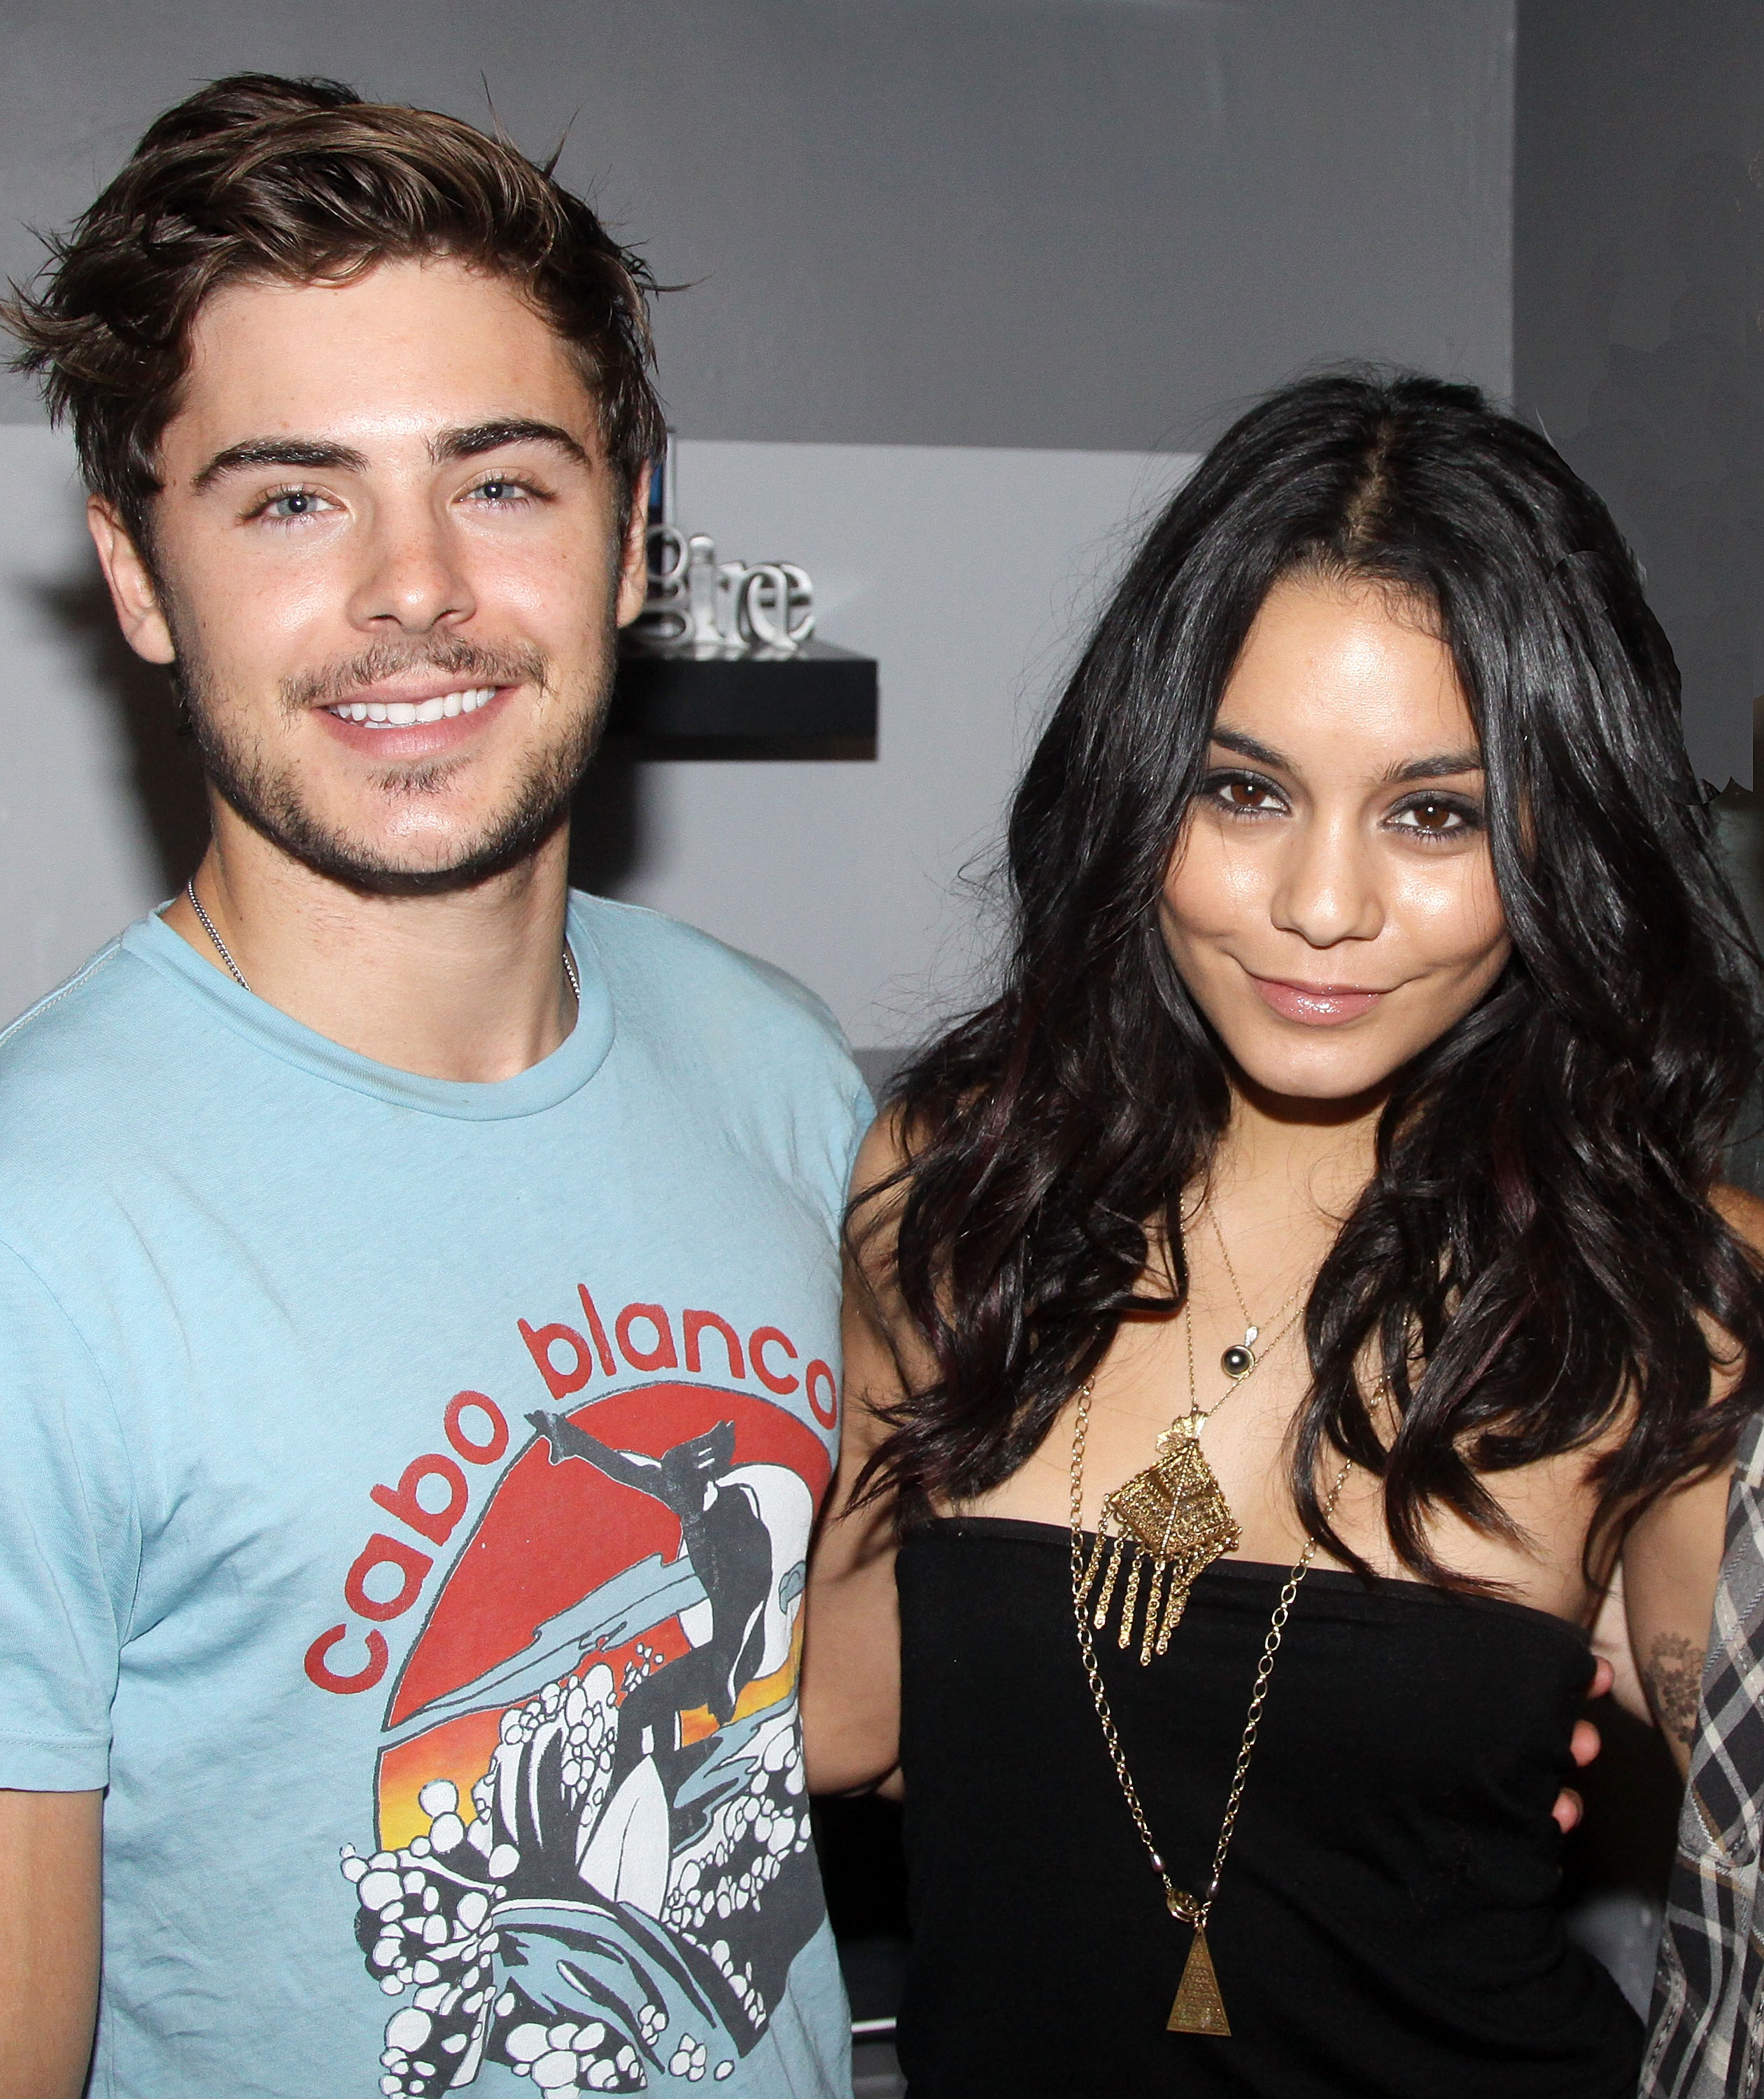 Zac Efron and Vanessa Hudgens starred in the High School Musical franchise